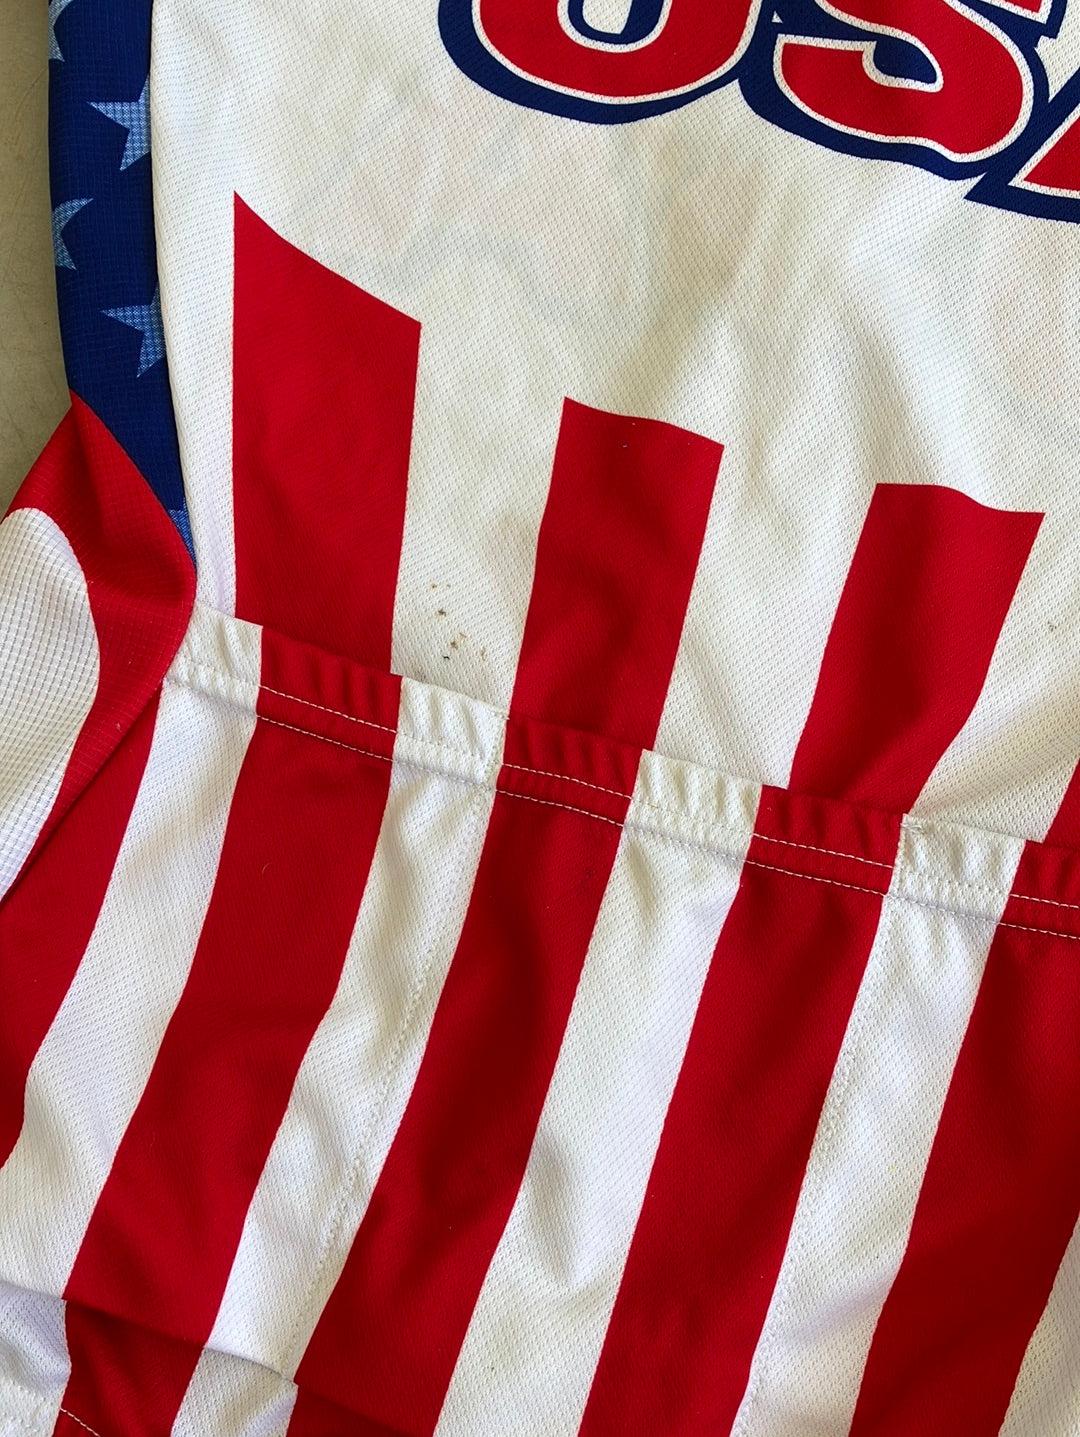 Short Sleeve Jersey | Skins | USA Men National Team | Pro-Issued Cycli ...